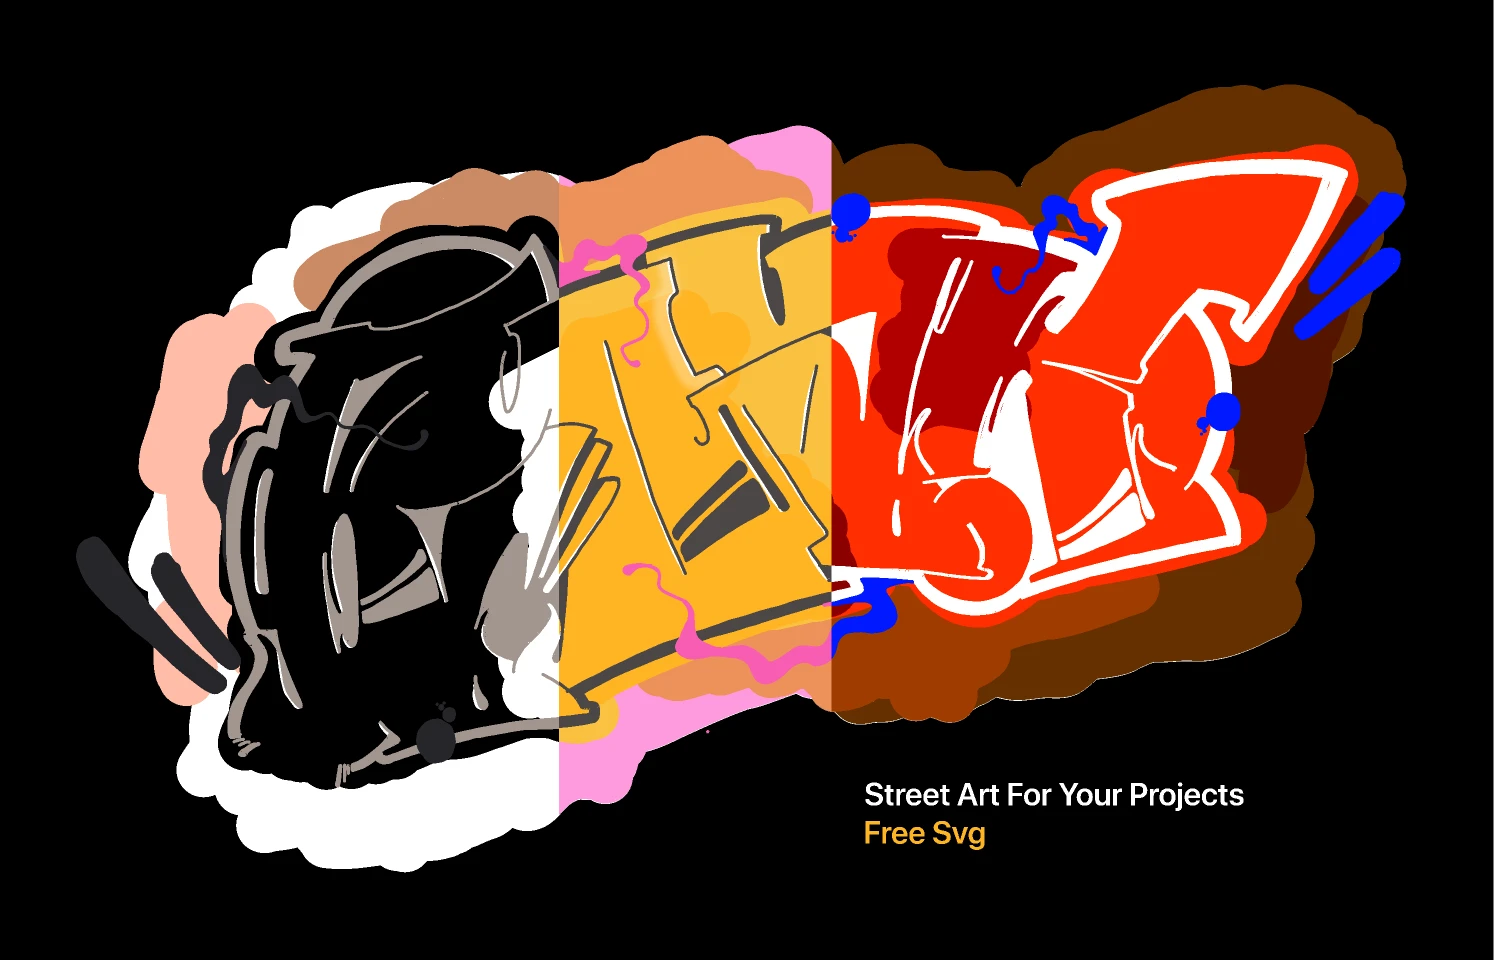 Free Street Art For Your Projects for Figma and Adobe XD